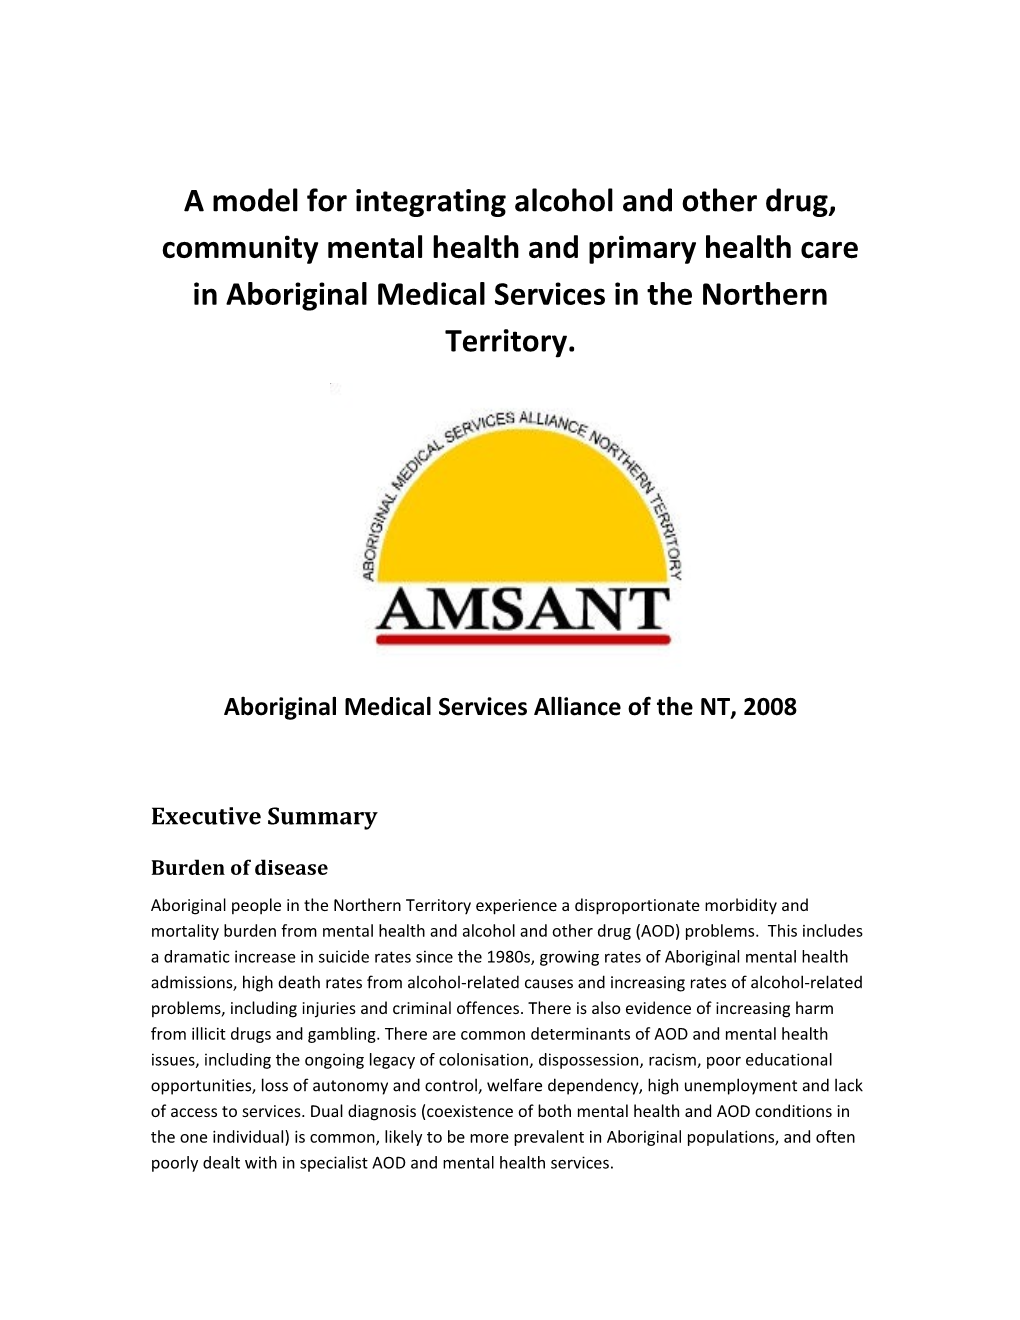 A Model For Integrating Alcohol And Other Drug, Community Mental Health And Primary Health Care In Aboriginal Medical Services In The Northern Territory